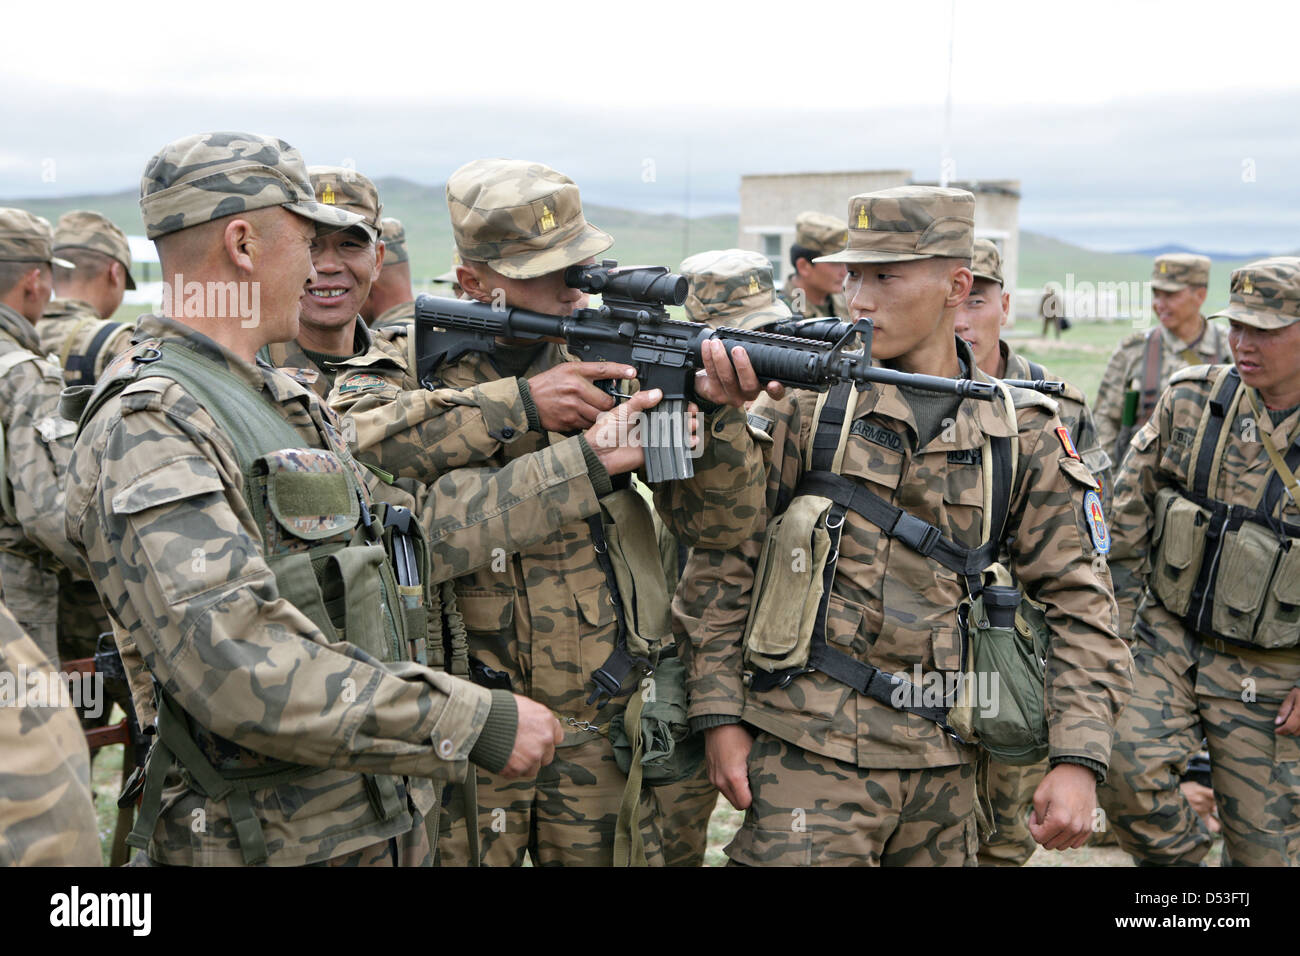 Mongolian armed forces soldiers examine a U.S. Marine Corps issued M-4 carbine as part of Khaan Quest 2009 at the Five Hills Training Area August 14, 2009 in Mongolia. Stock Photo